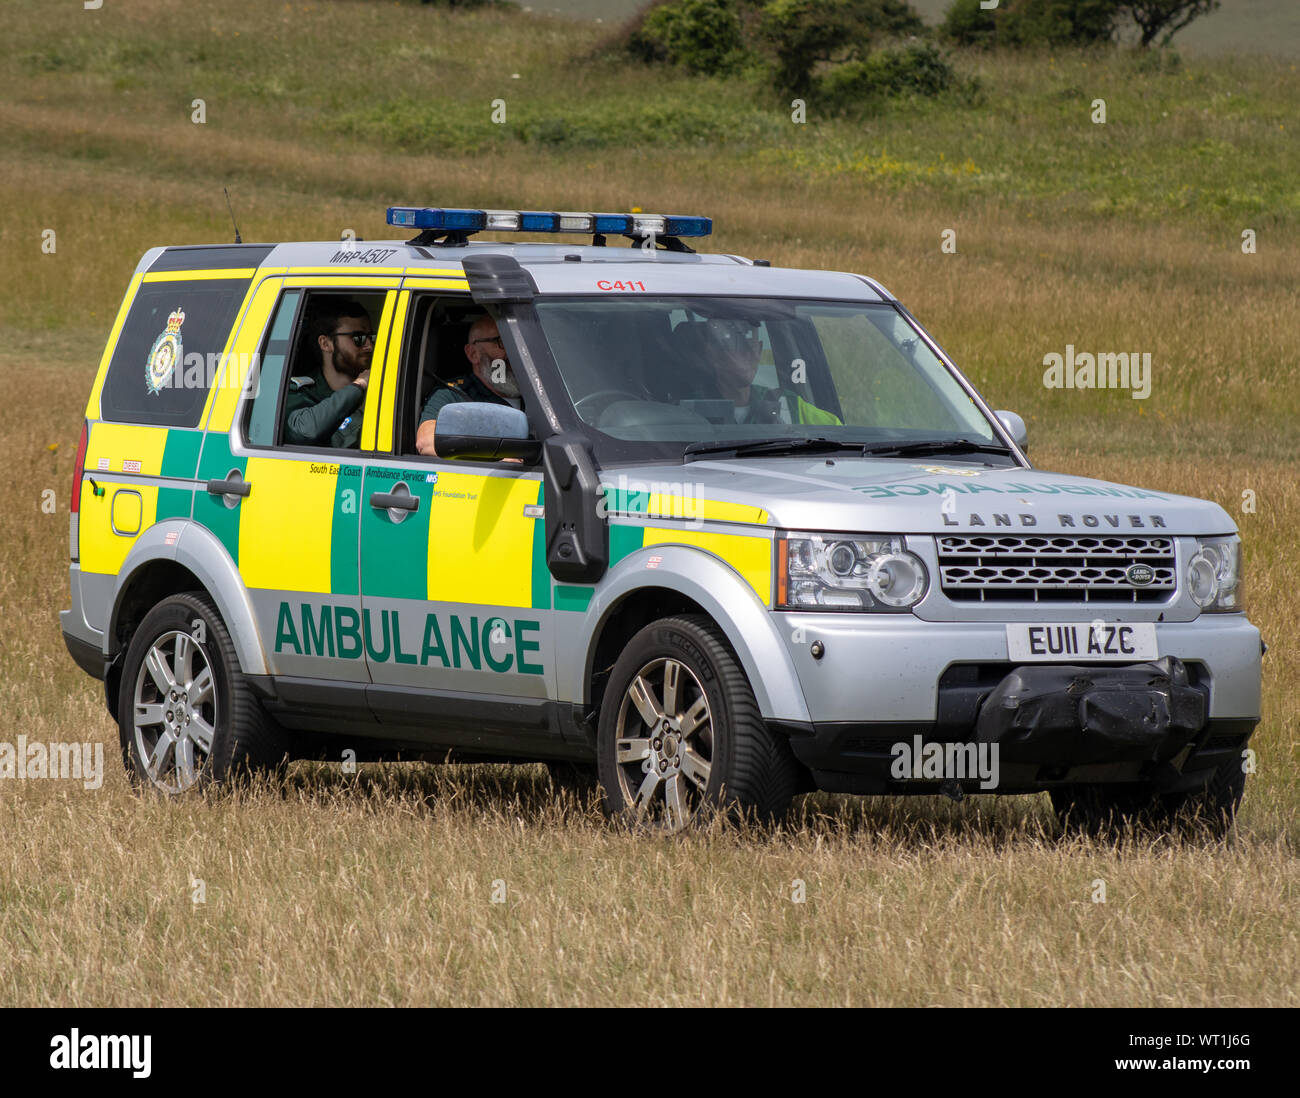 East Sussex, Beachy Head, UK 10th July 2019: A Land Rover Ambulance attending an incident at the Beachy Head cliff tops. Stock Photo